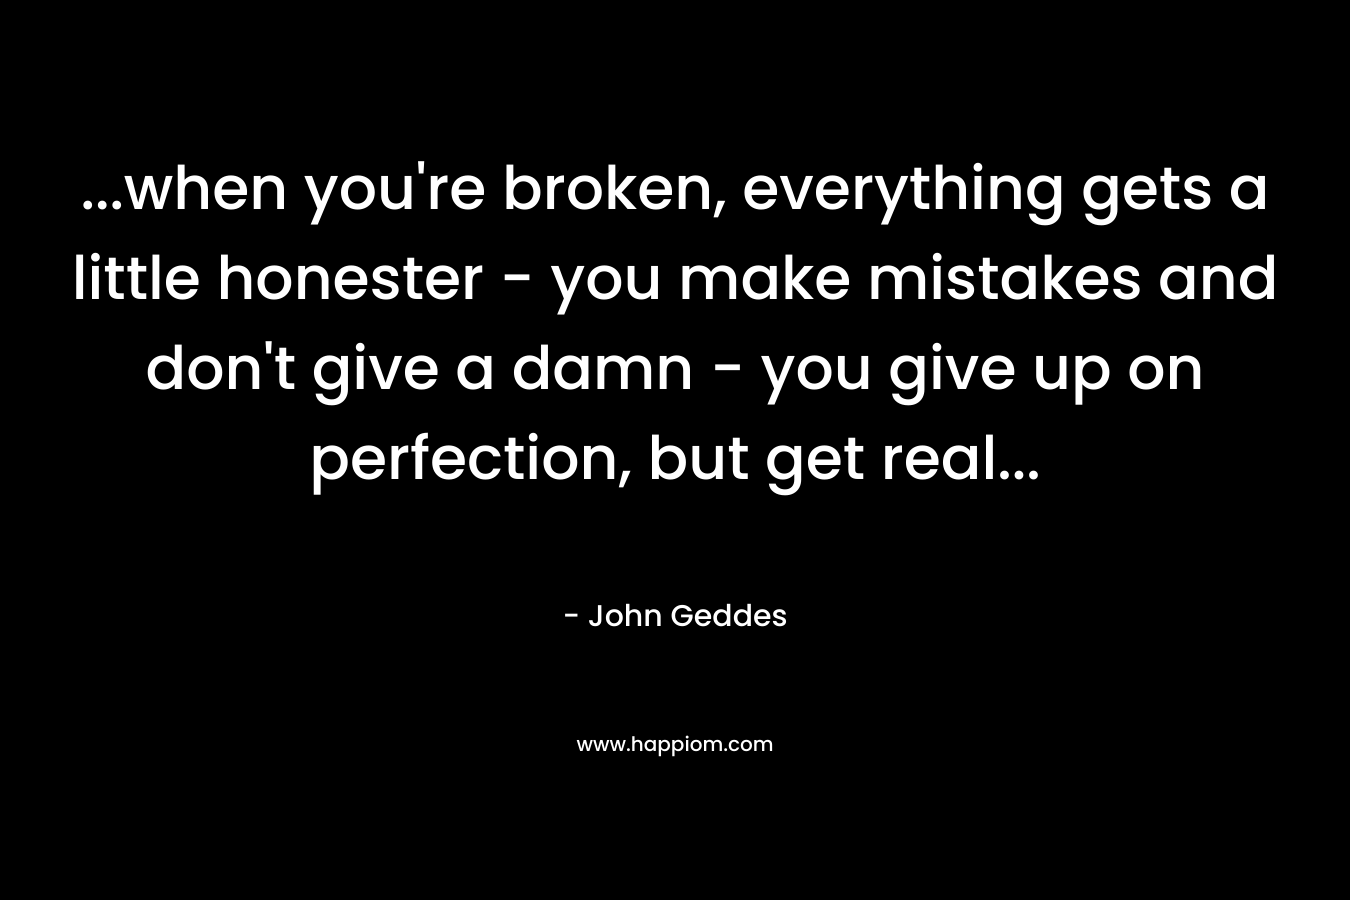 …when you’re broken, everything gets a little honester – you make mistakes and don’t give a damn – you give up on perfection, but get real… – John Geddes